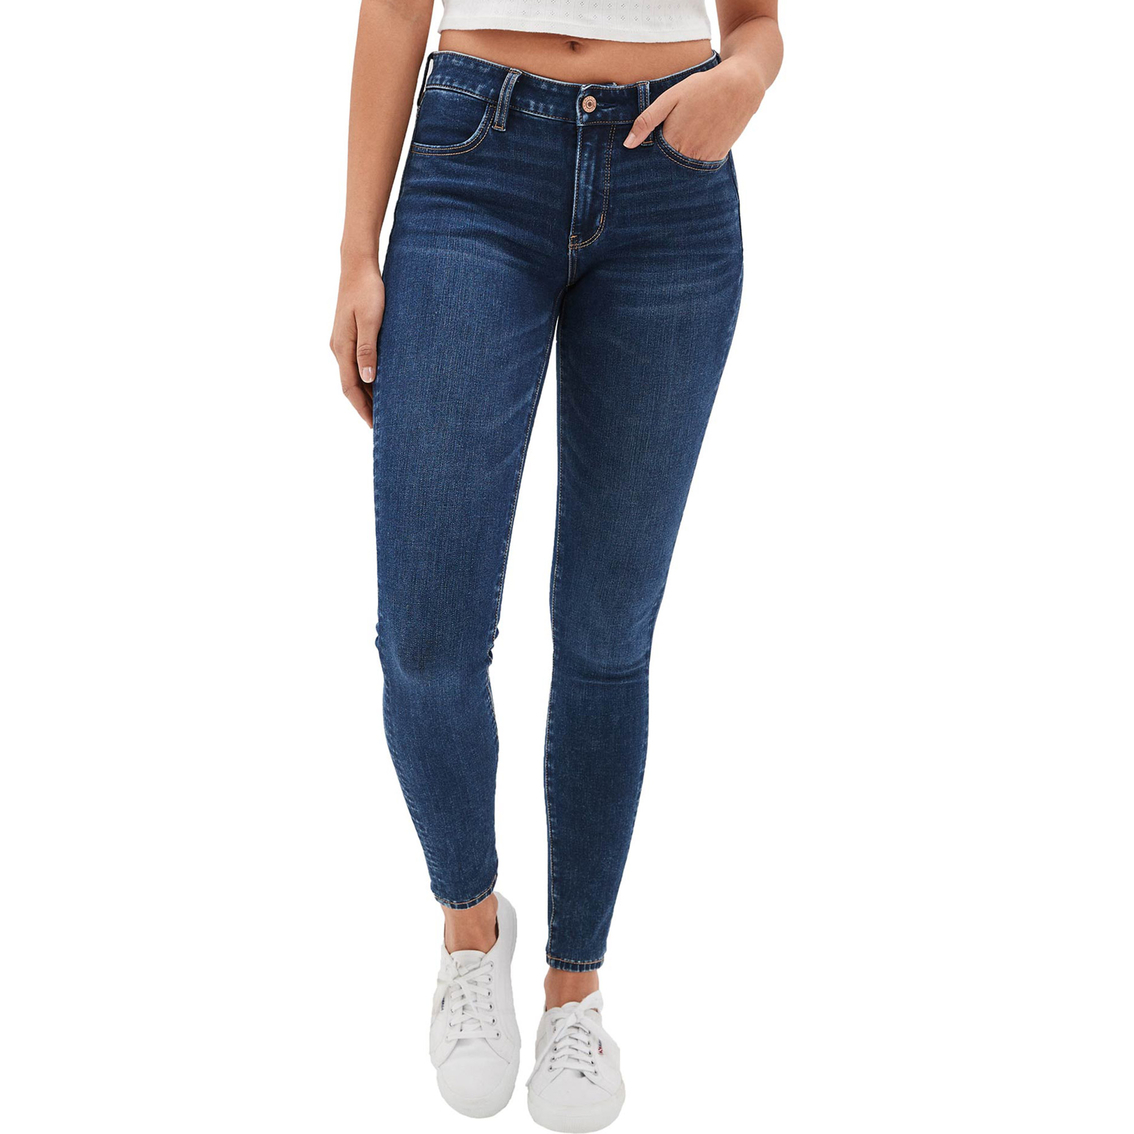 American Eagle Dream Low-rise Jeggings | Jeans | Clothing & Accessories ...